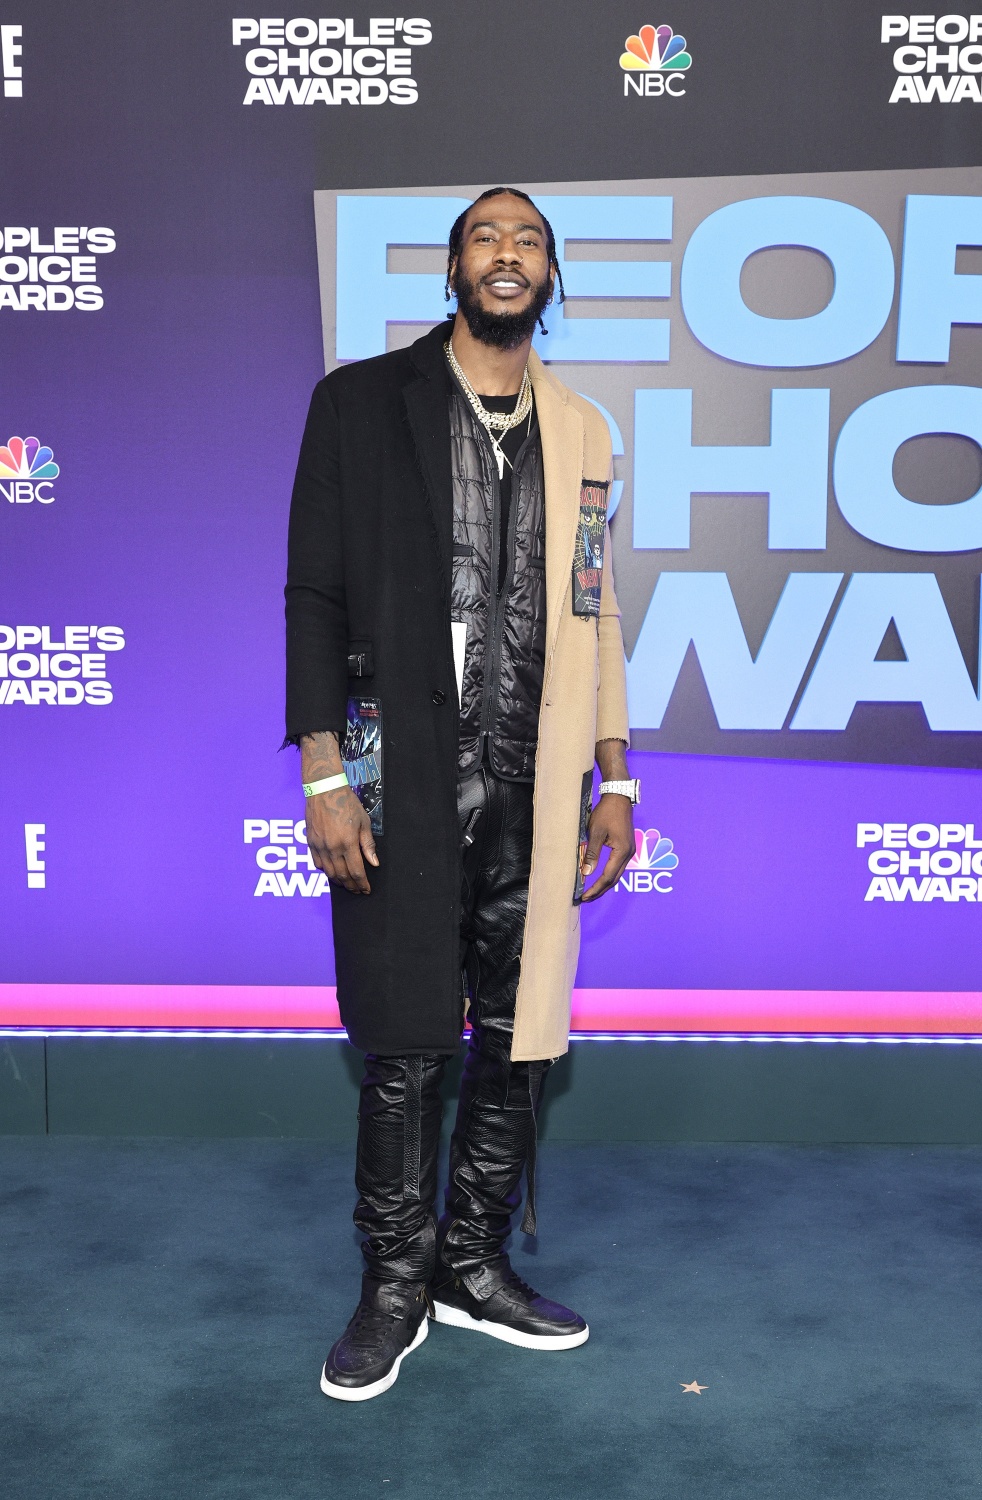 Iman Shumpert  47th Annual People's Choice Awards at Barker Hangar on December 07, 2021 in Santa Monica, California. (Photo by Amy Sussman/Getty Images,)